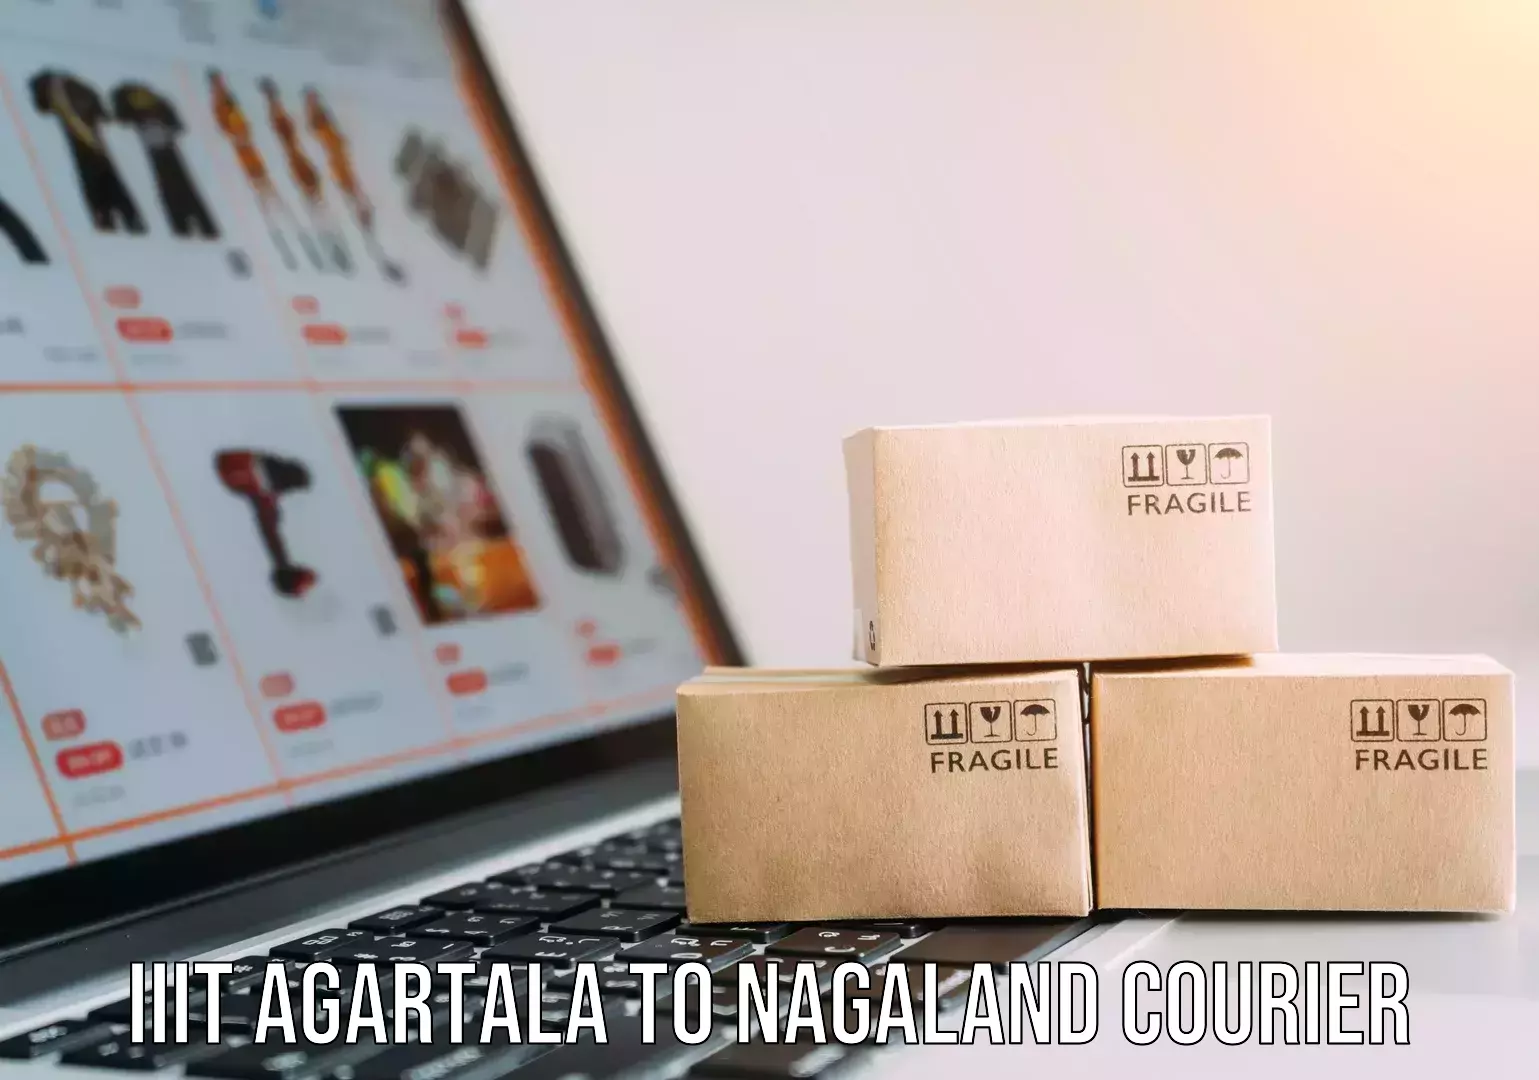 Multi-national courier services IIIT Agartala to Nagaland